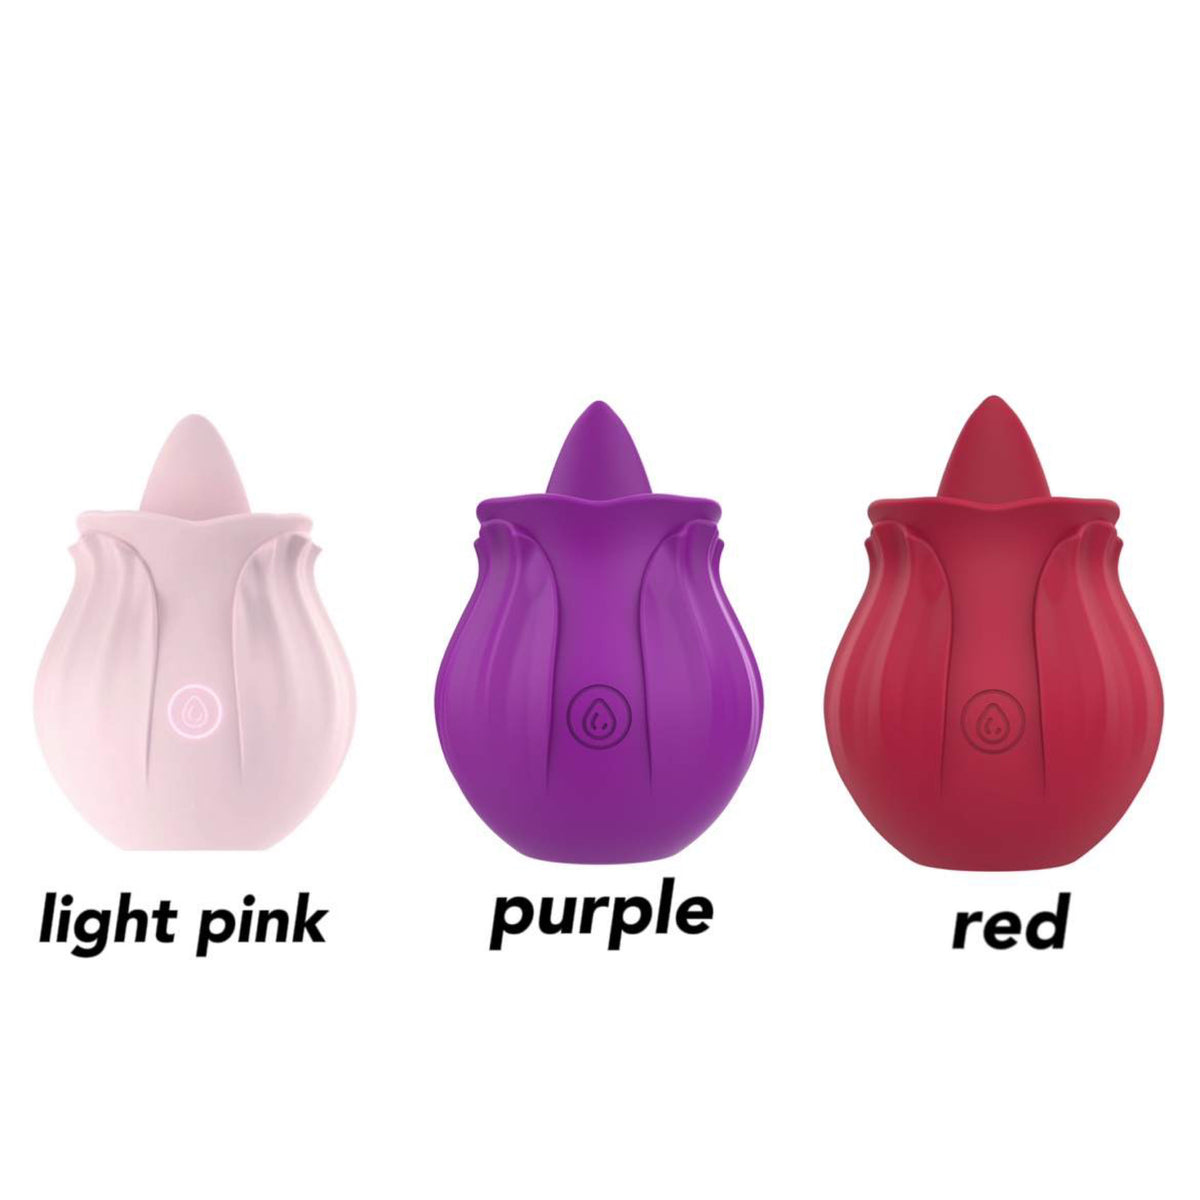 Rose and Tongue Adult Massager – A Girl Named Lee